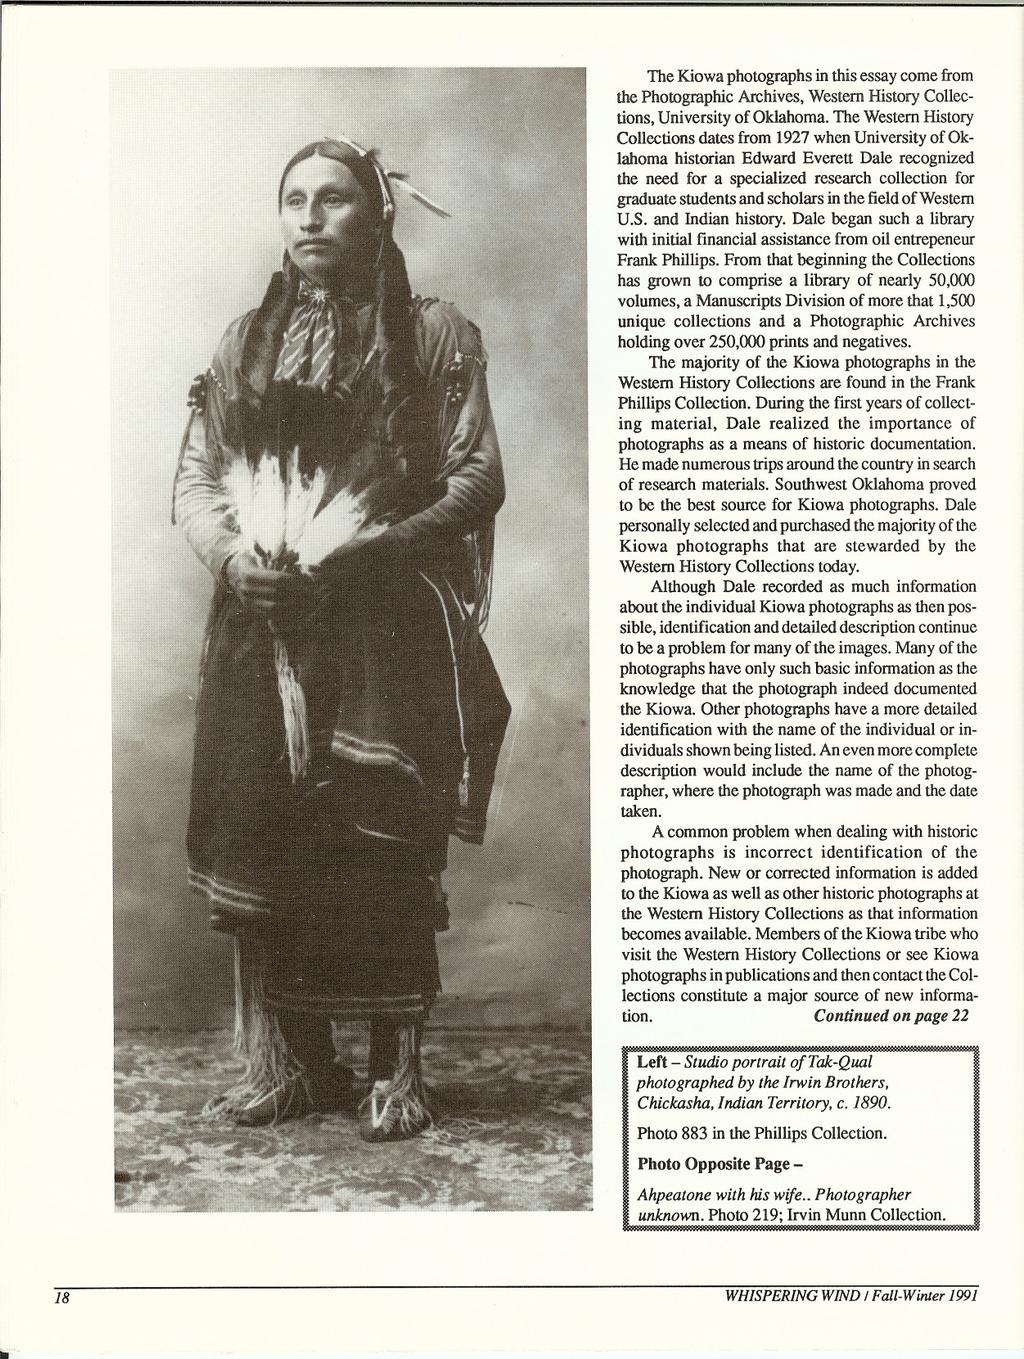 III The Kiowa photographs in this essay come from the Photographic Archives, Western History Collections, University of Oklahoma.